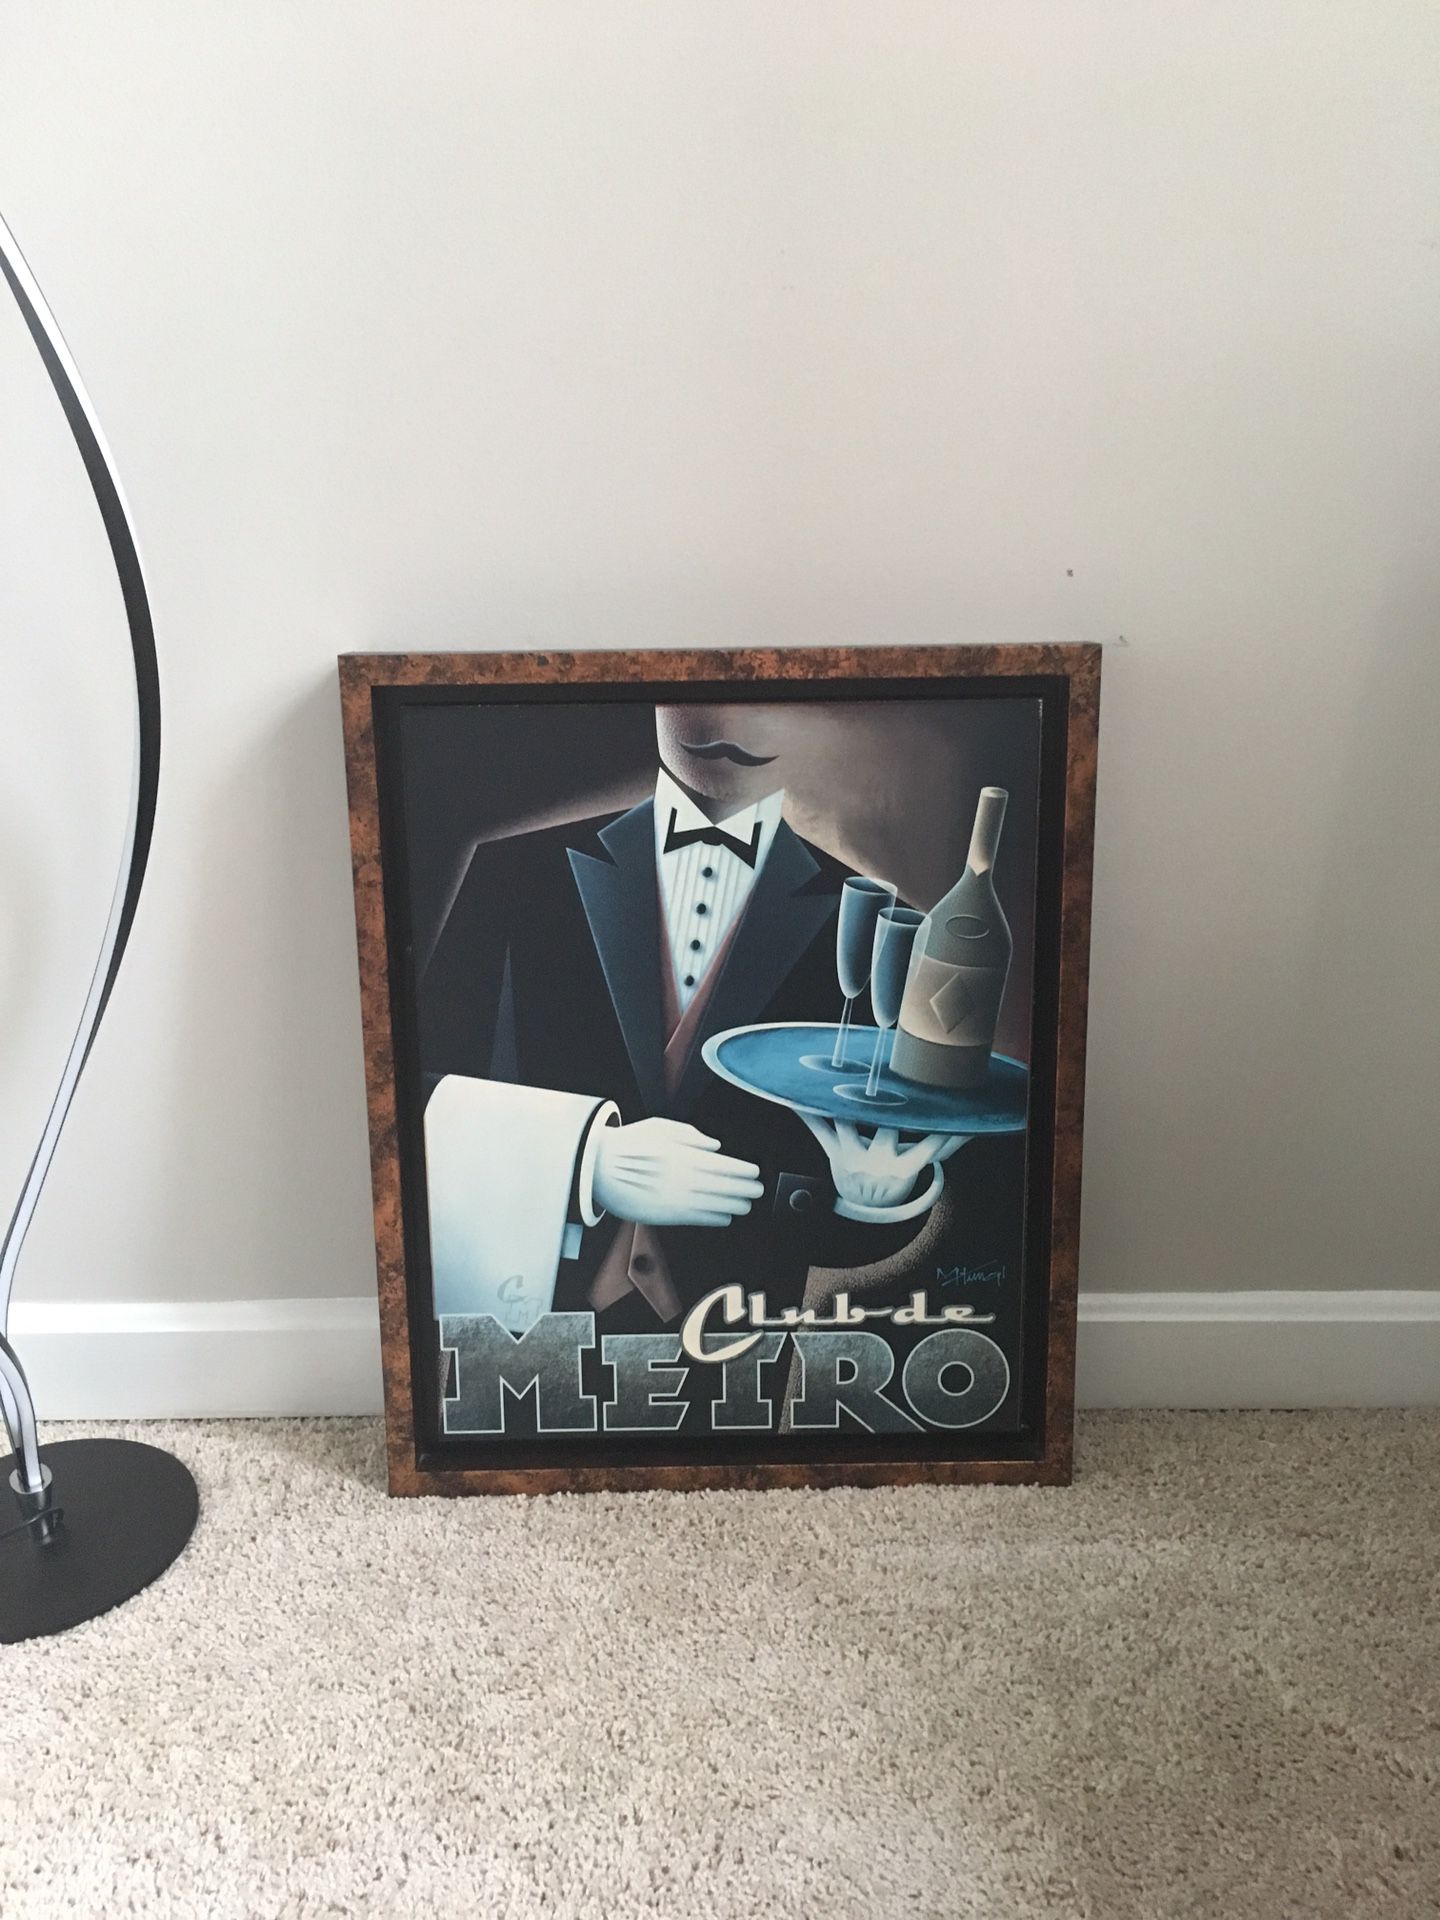 Wall art - Great condition!